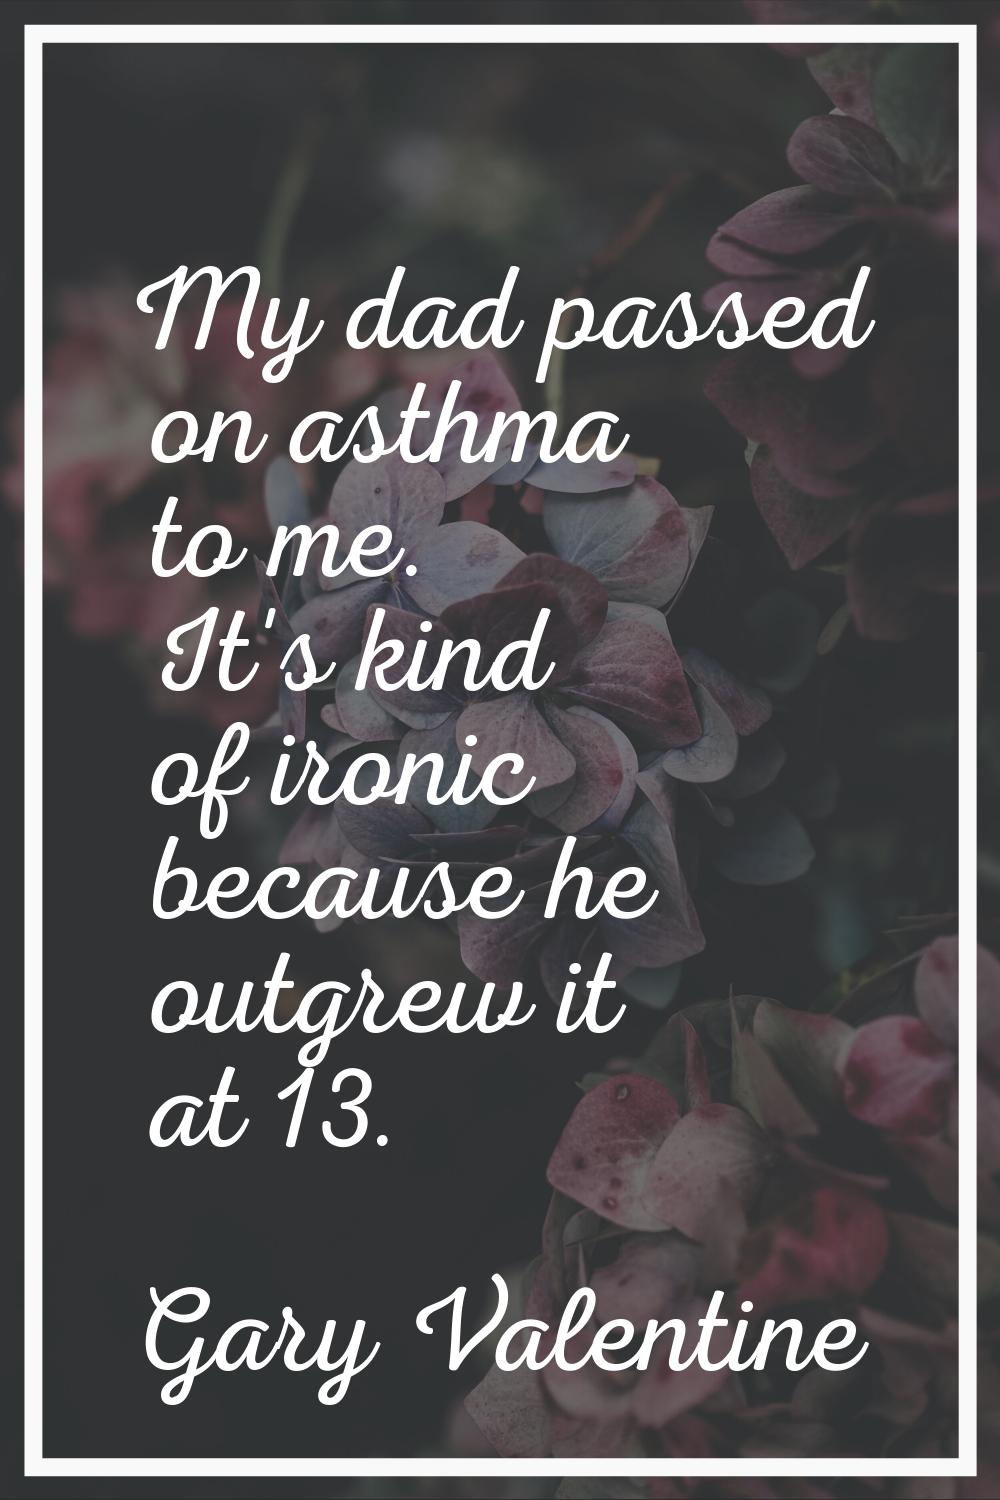 My dad passed on asthma to me. It's kind of ironic because he outgrew it at 13.